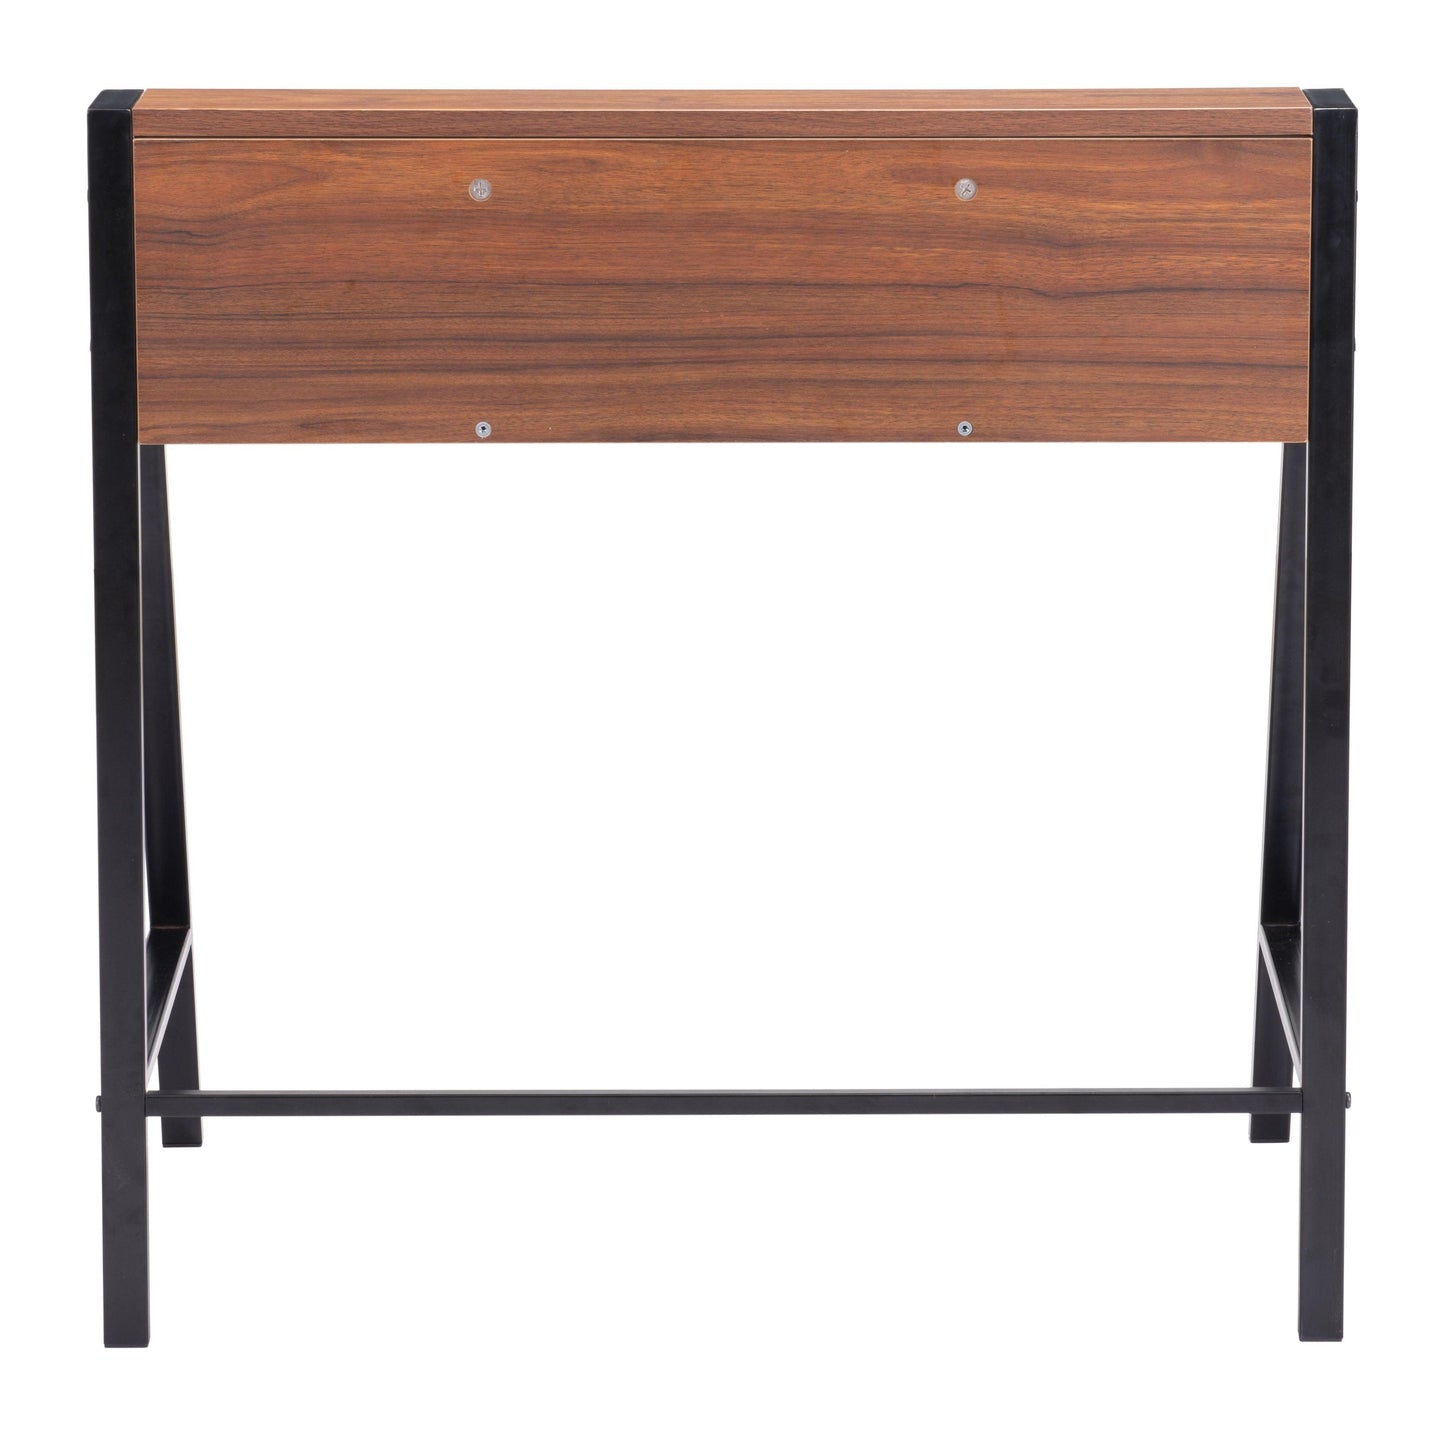 Poland Desk Walnut & Black - Sideboards and Things Brand_Zuo Modern, Color_Black, Color_Brown, Depth_10-20, Finish_Powder Coated, Height_30-40, Materials_Metal, Materials_Wood, Metal Type_Steel, Product Type_Standard Desk, Width_30-40, Wood Species_MDF